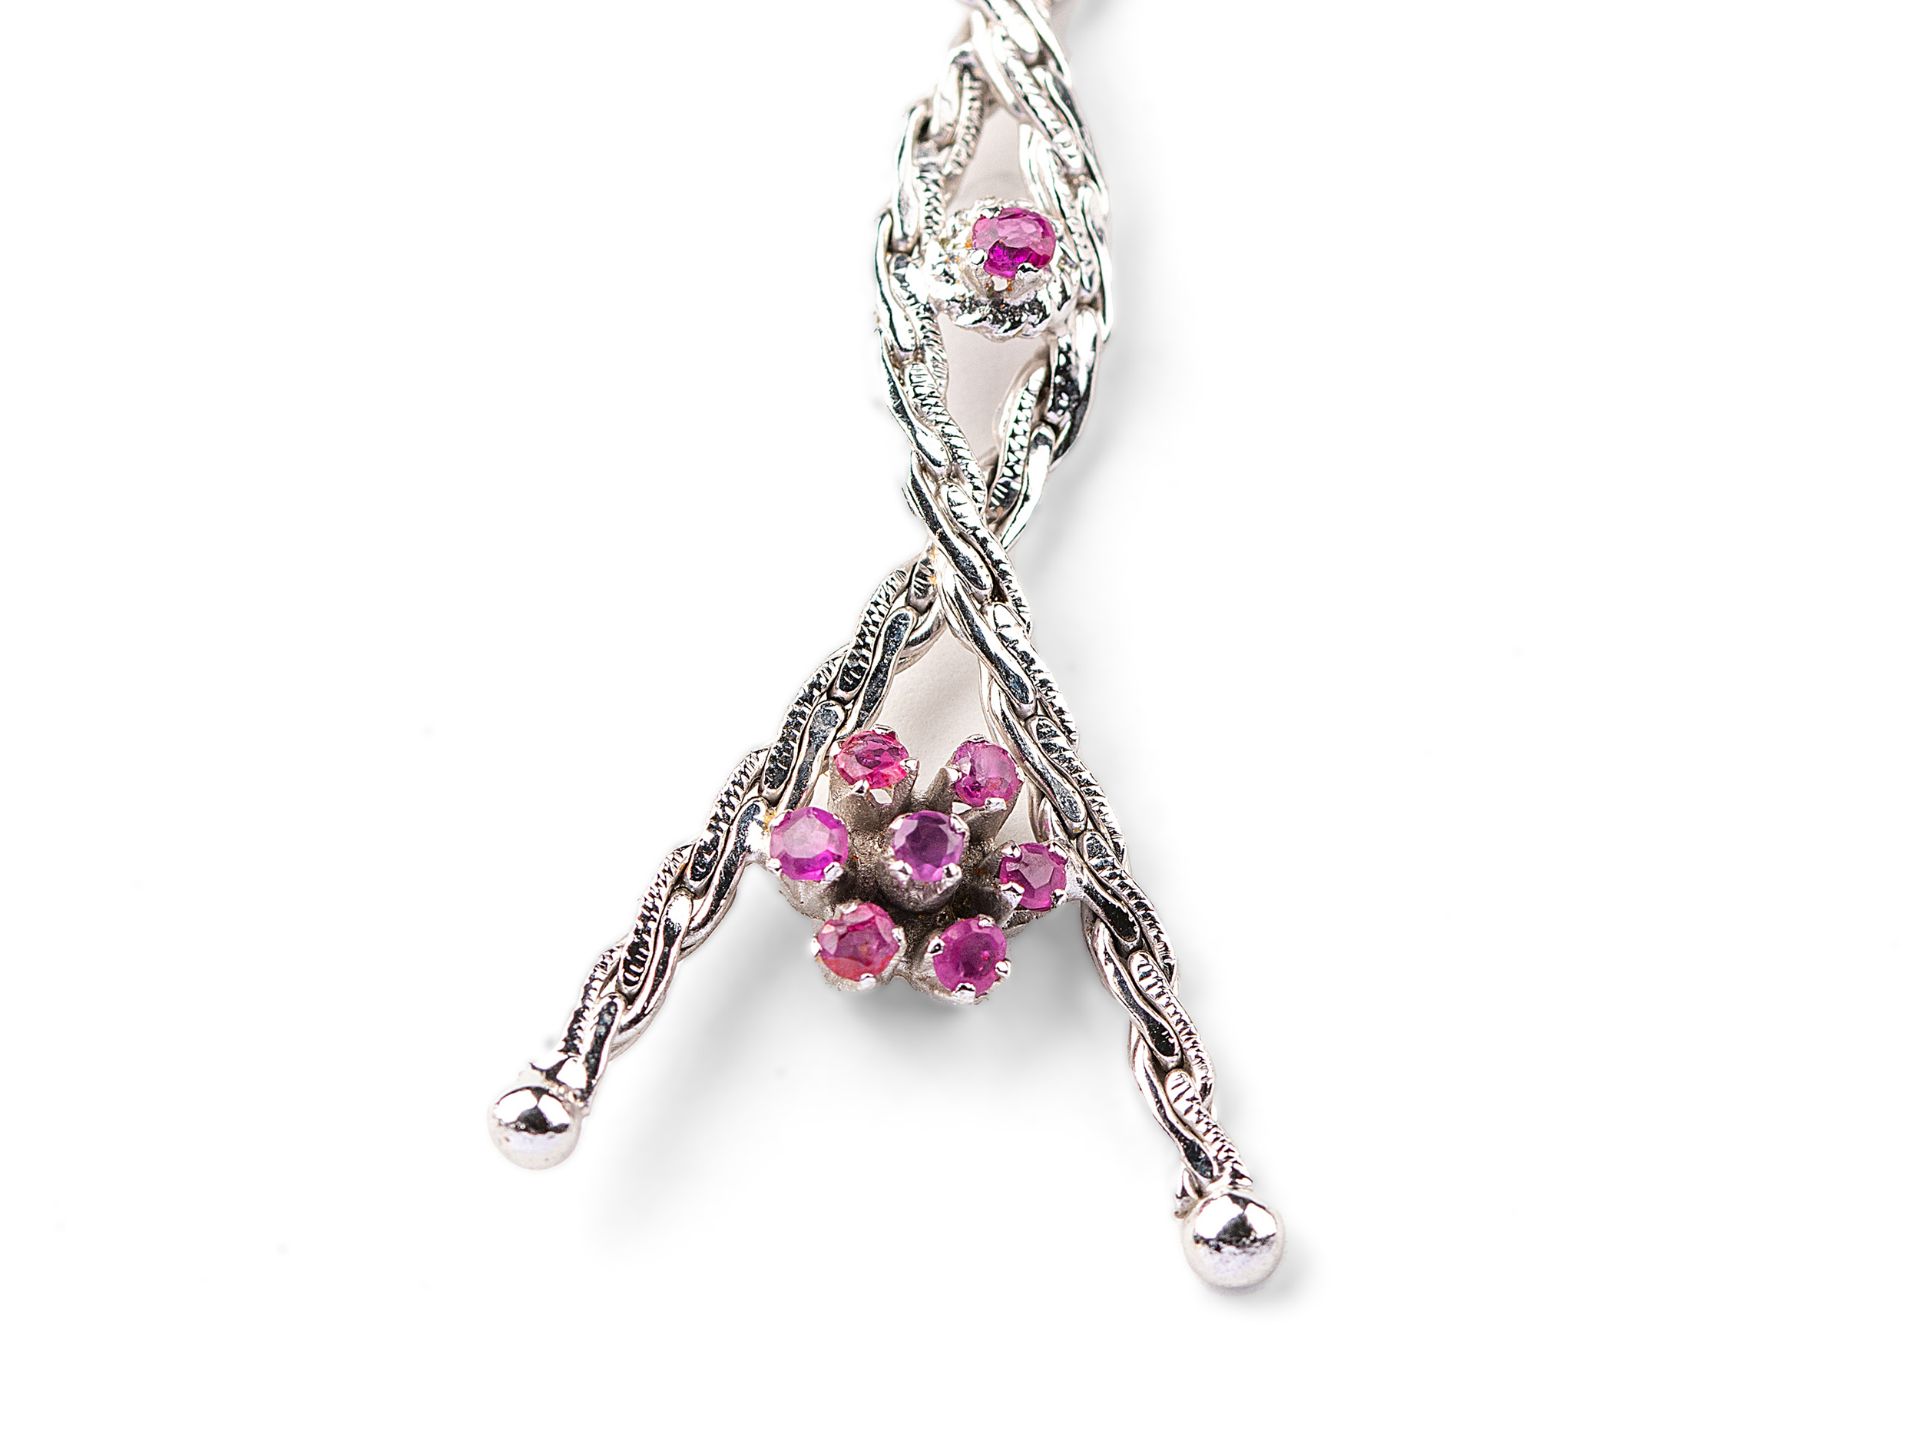 Necklace, 14kt white gold marked, Red coloured stones (rubies/rubelite?) - Image 2 of 2